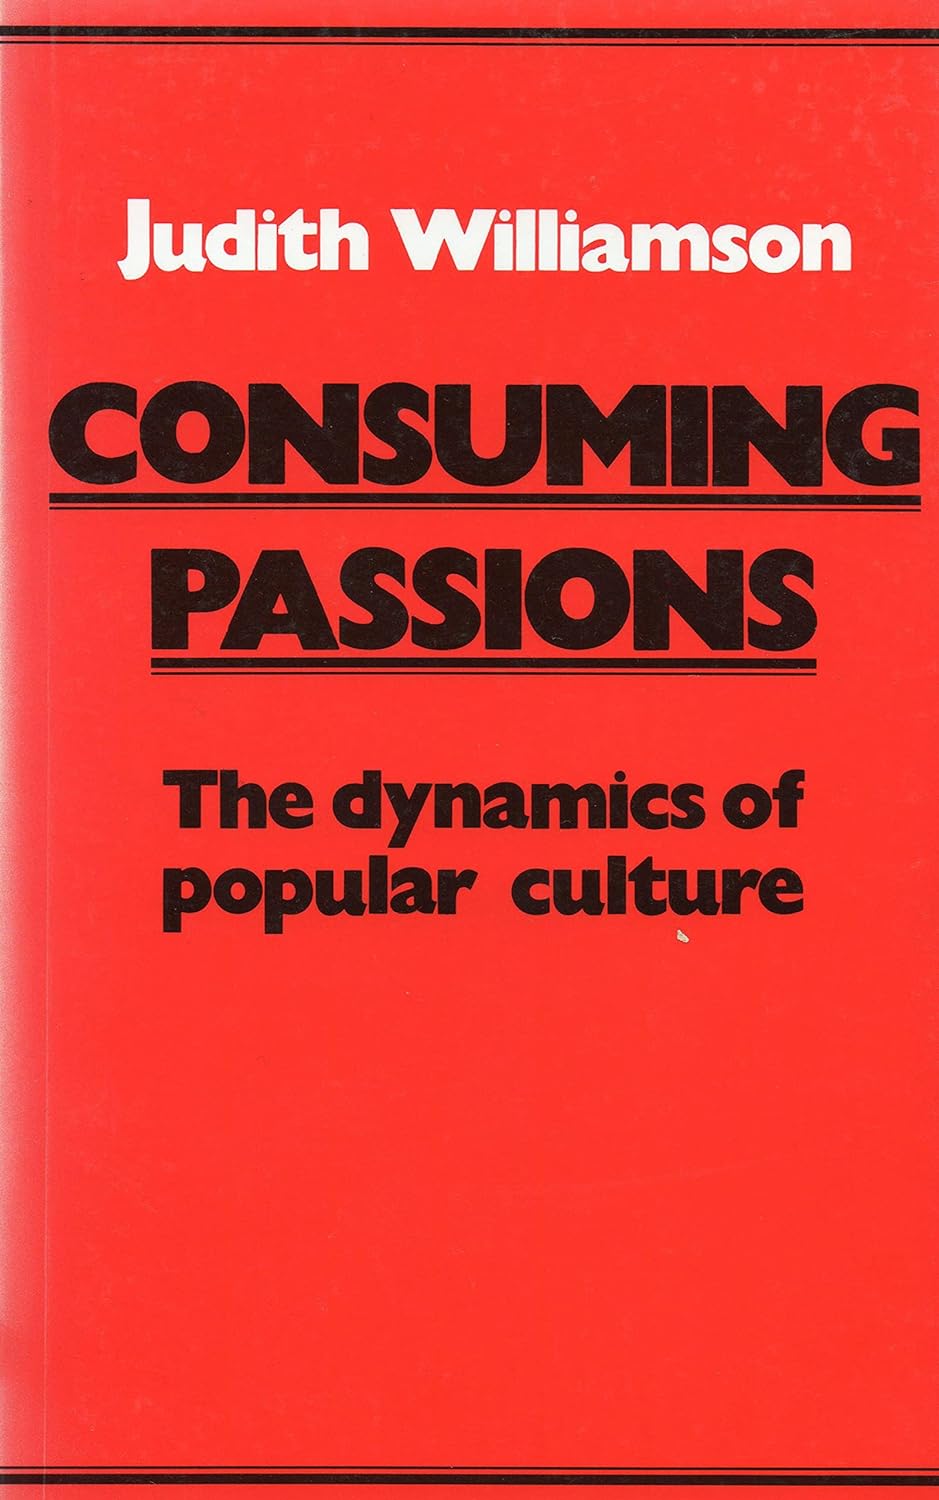 Consuming Passions: The Dynamics of Popular Culture